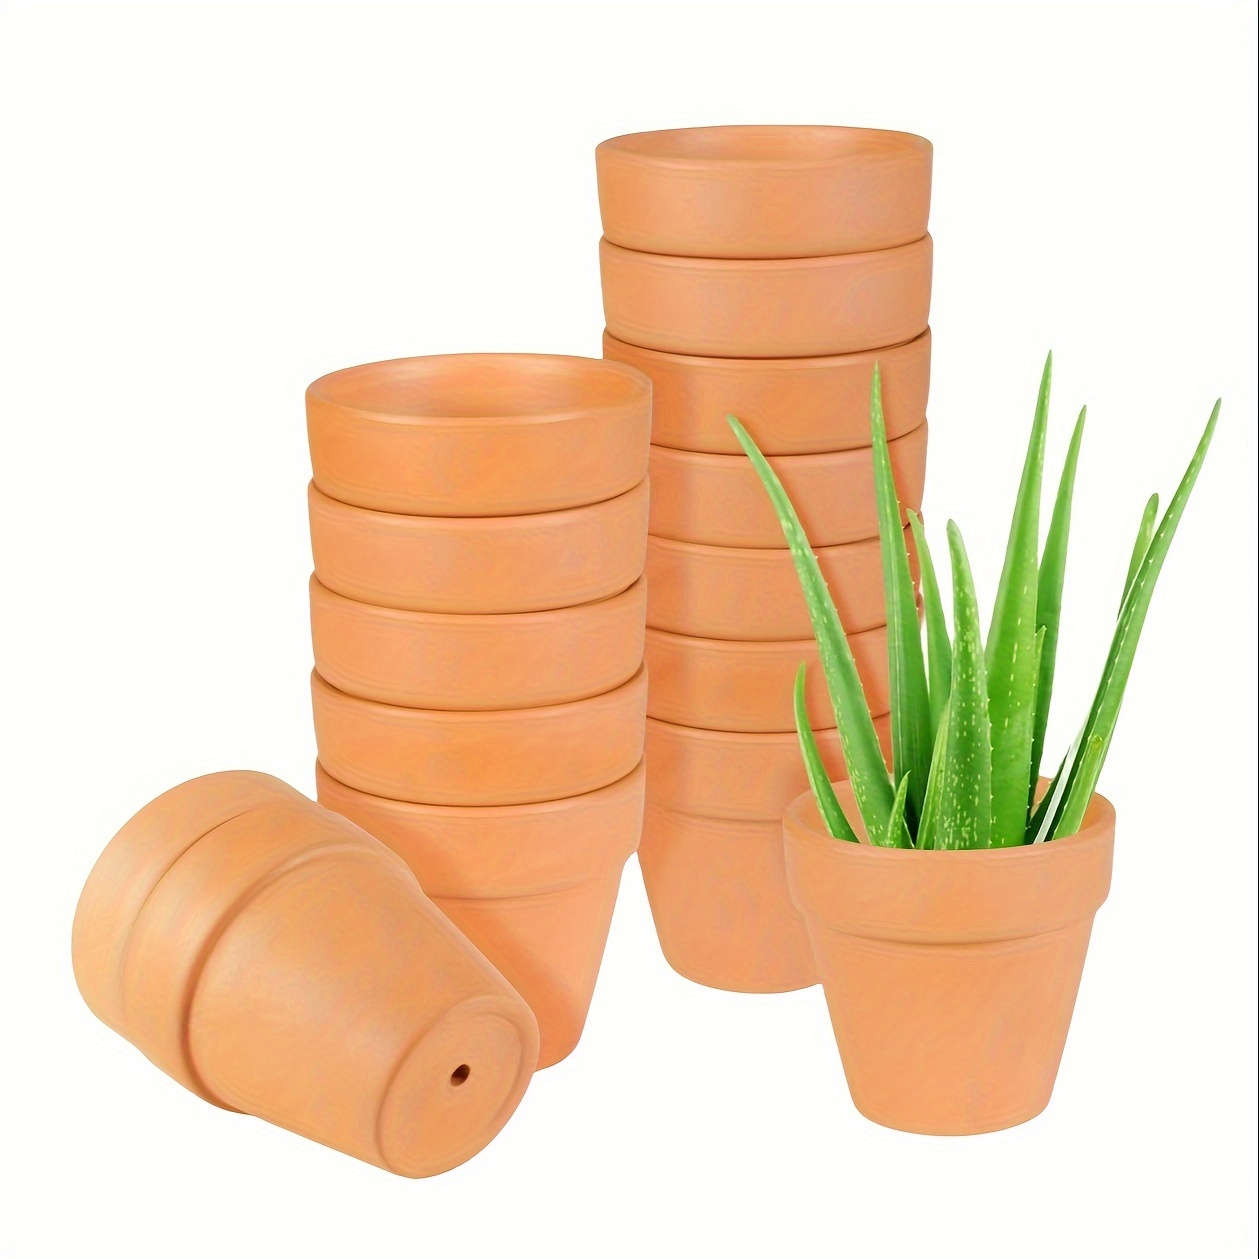 

14pcs Mini Clay Pots Small Terracotta Pots 2.8 Inch Mini Flower Pots Succulent Nursery Ceramic Pottery Planter Mini Plant Pots With Drainage Hole For Indoor Outdoor Cactus Craft Wedding (red)